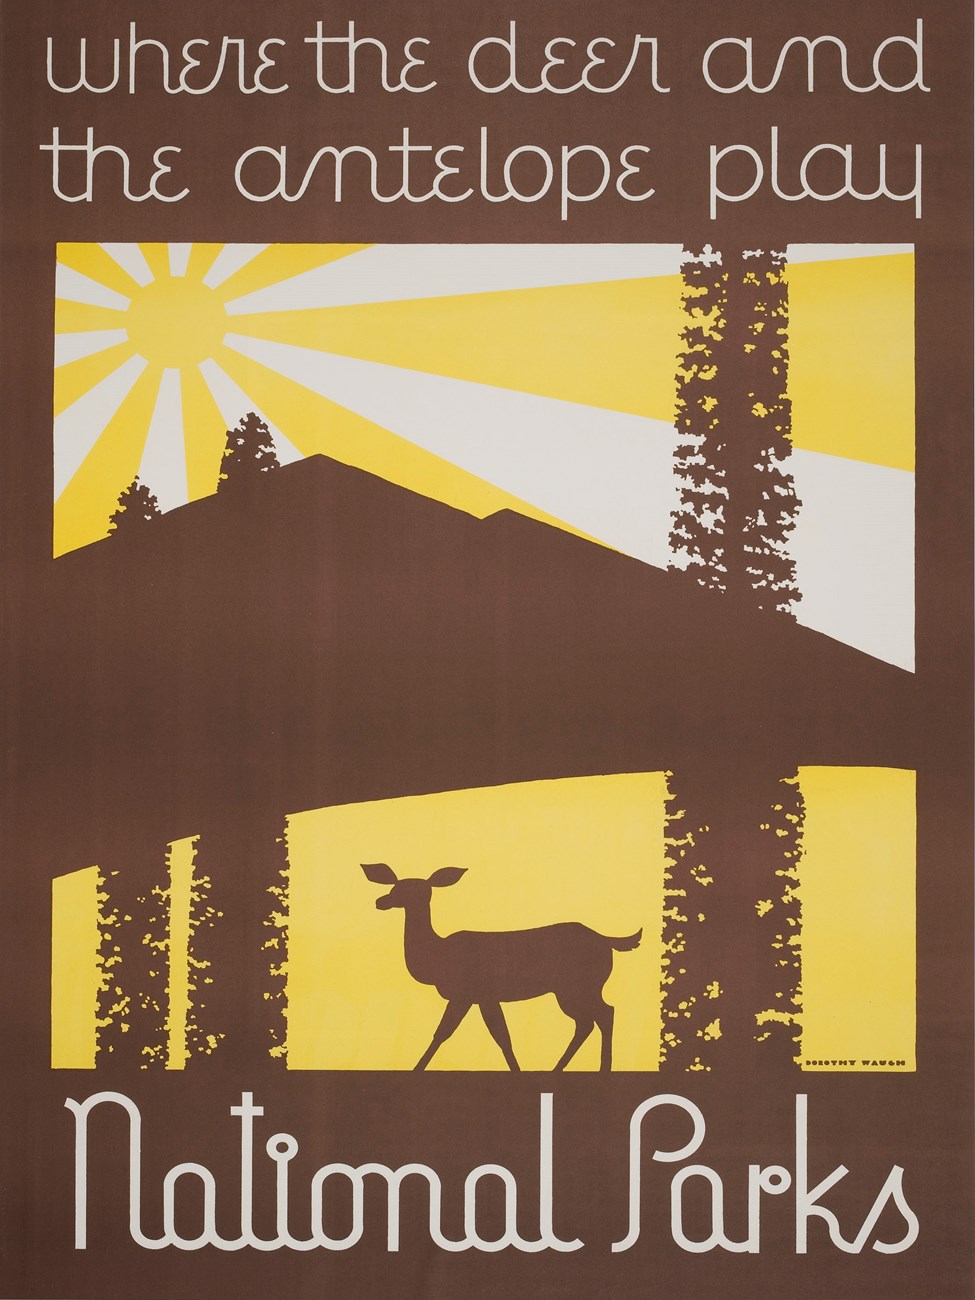 Brown, yellow, and white poster featuring a deer, trees, lake, mountain, and sun. "Where the deer and the antelope play" is above the image and "national parks" below it.